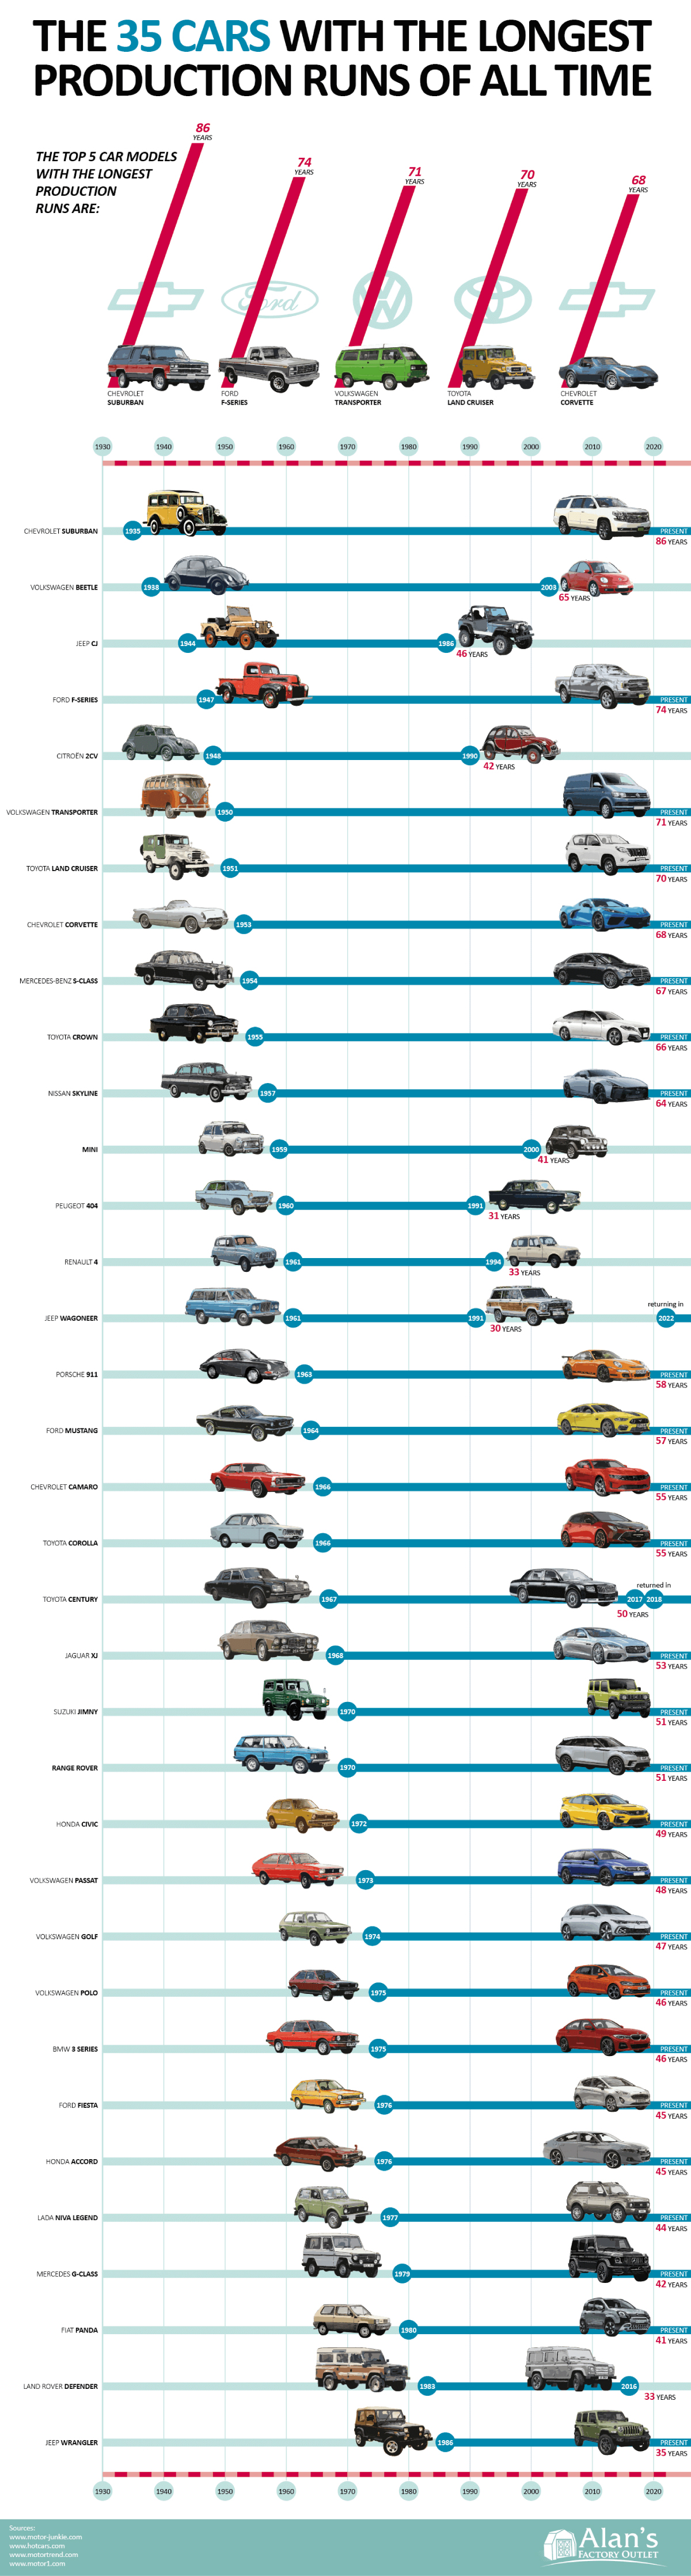 vehicles with the longest production runs